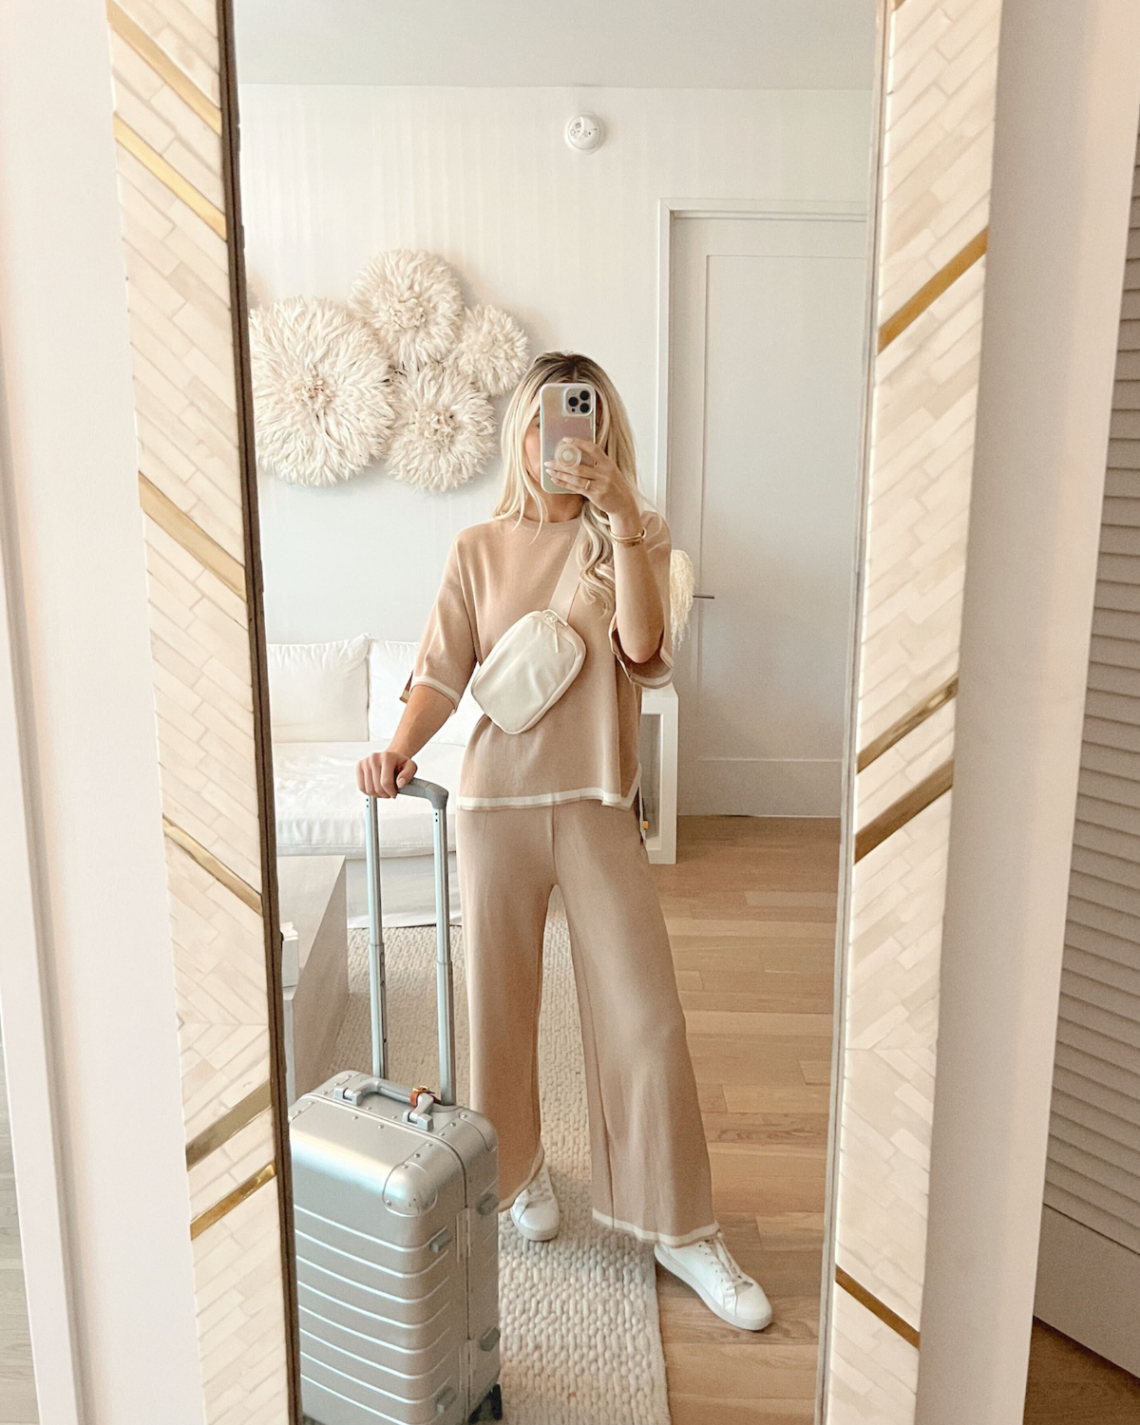 How to dress for the airport Fashion tips and tricks for packing and flying